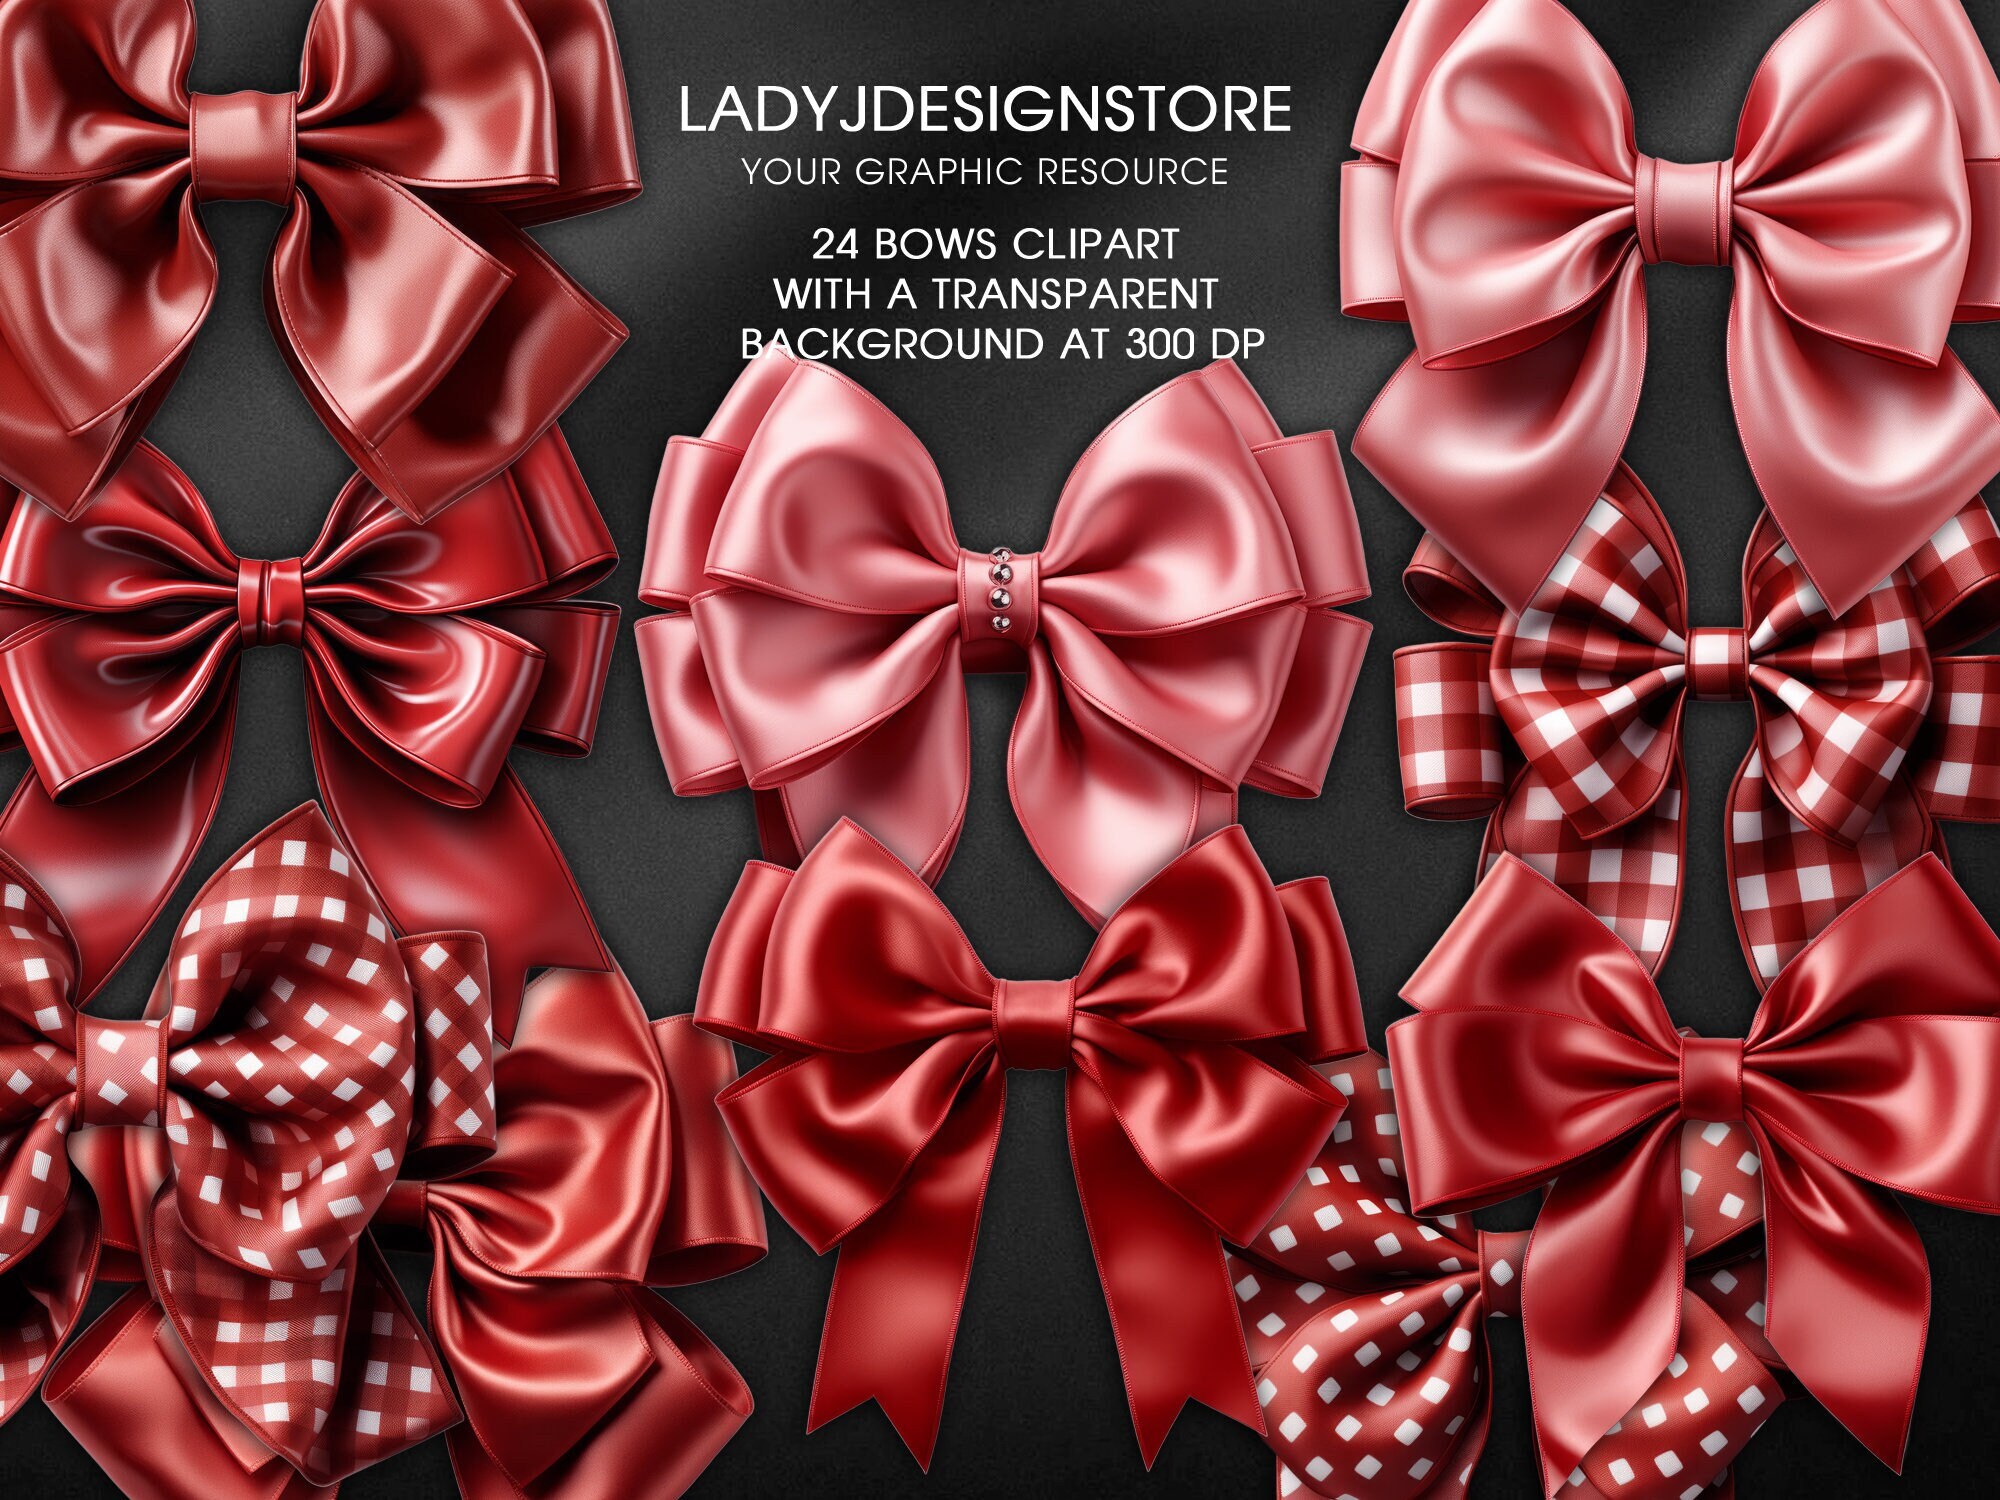 Red satin bow Made in France - Chérie et Dandy